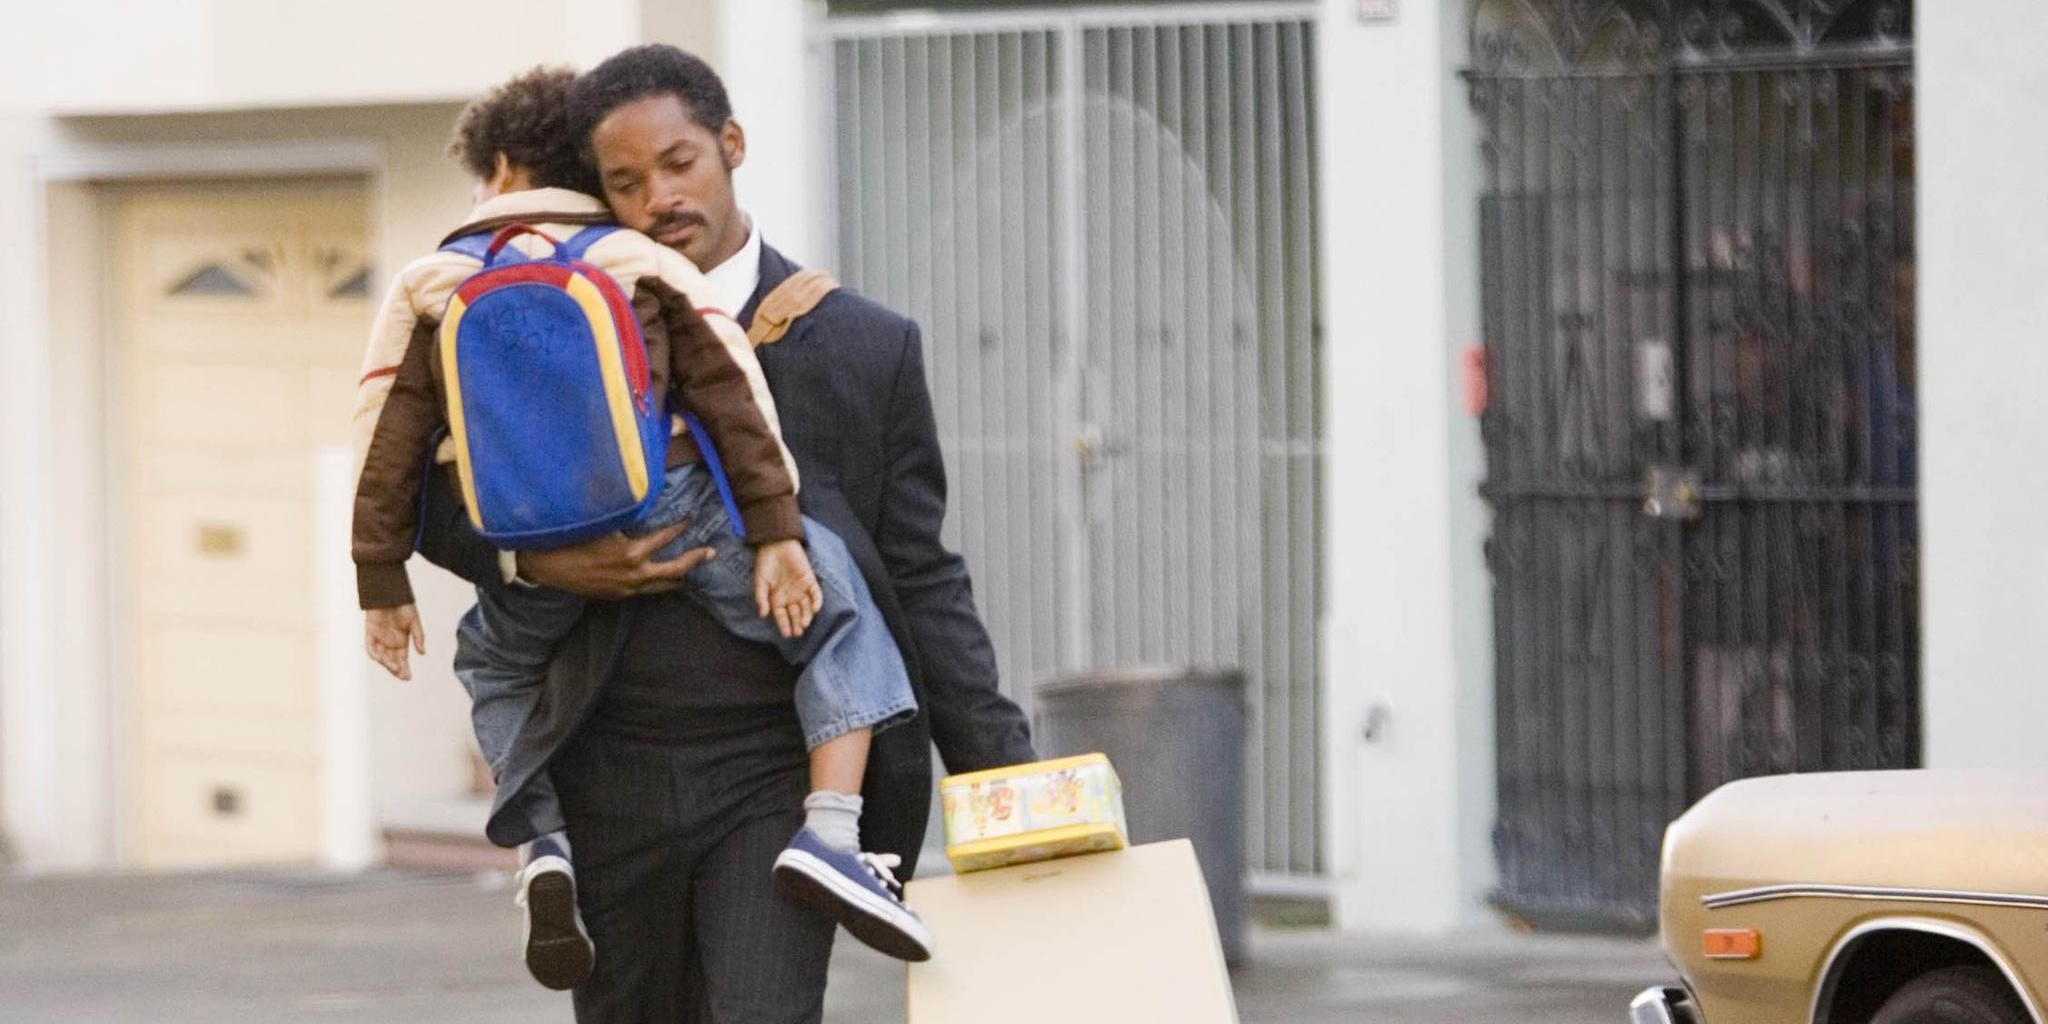 Chris and his son cross the street in Pursuit of Happyness